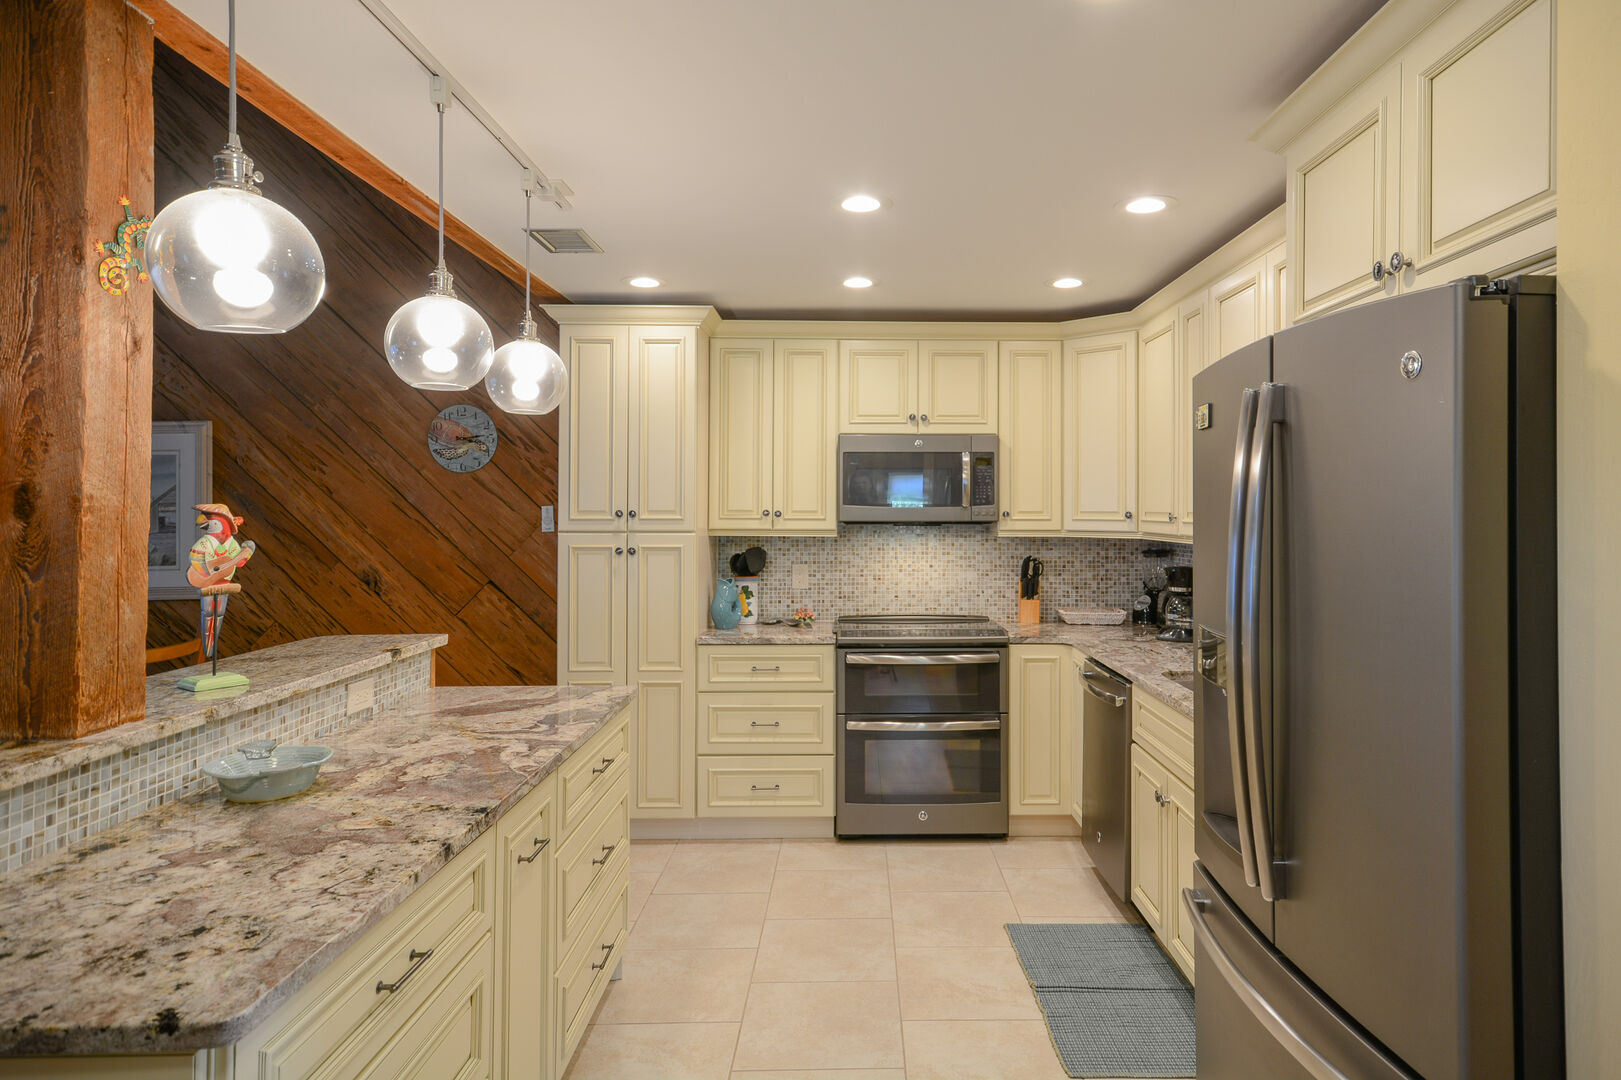 The totally renovated, ocean view kitchen is fully equipped.